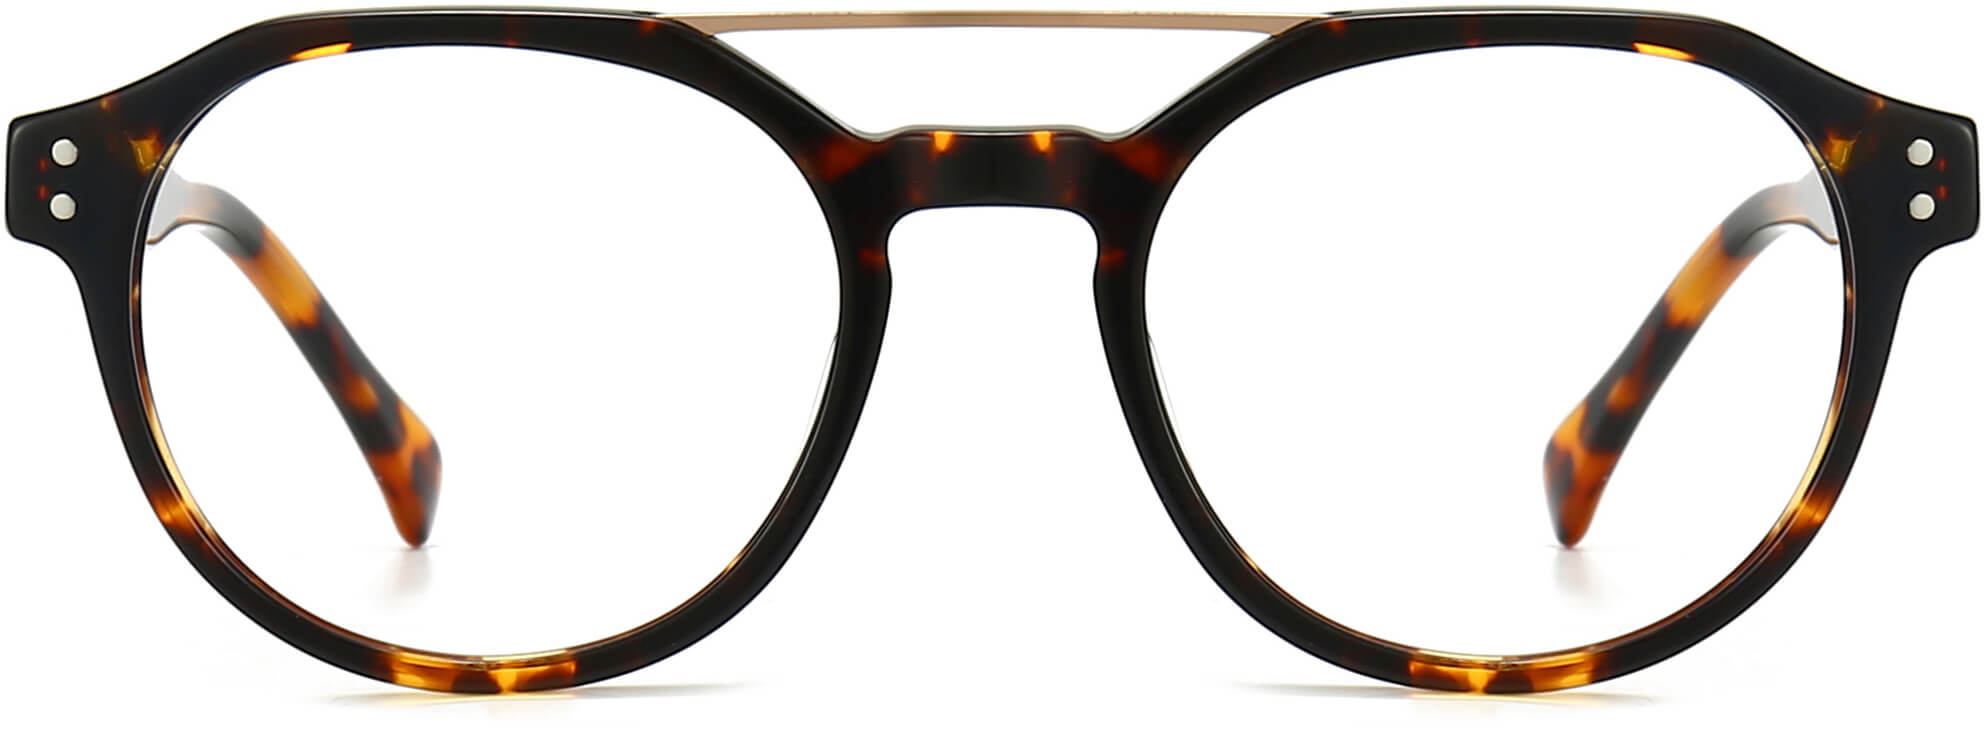 Emberly Round Tortoise Eyeglasses from ANRRI, front view